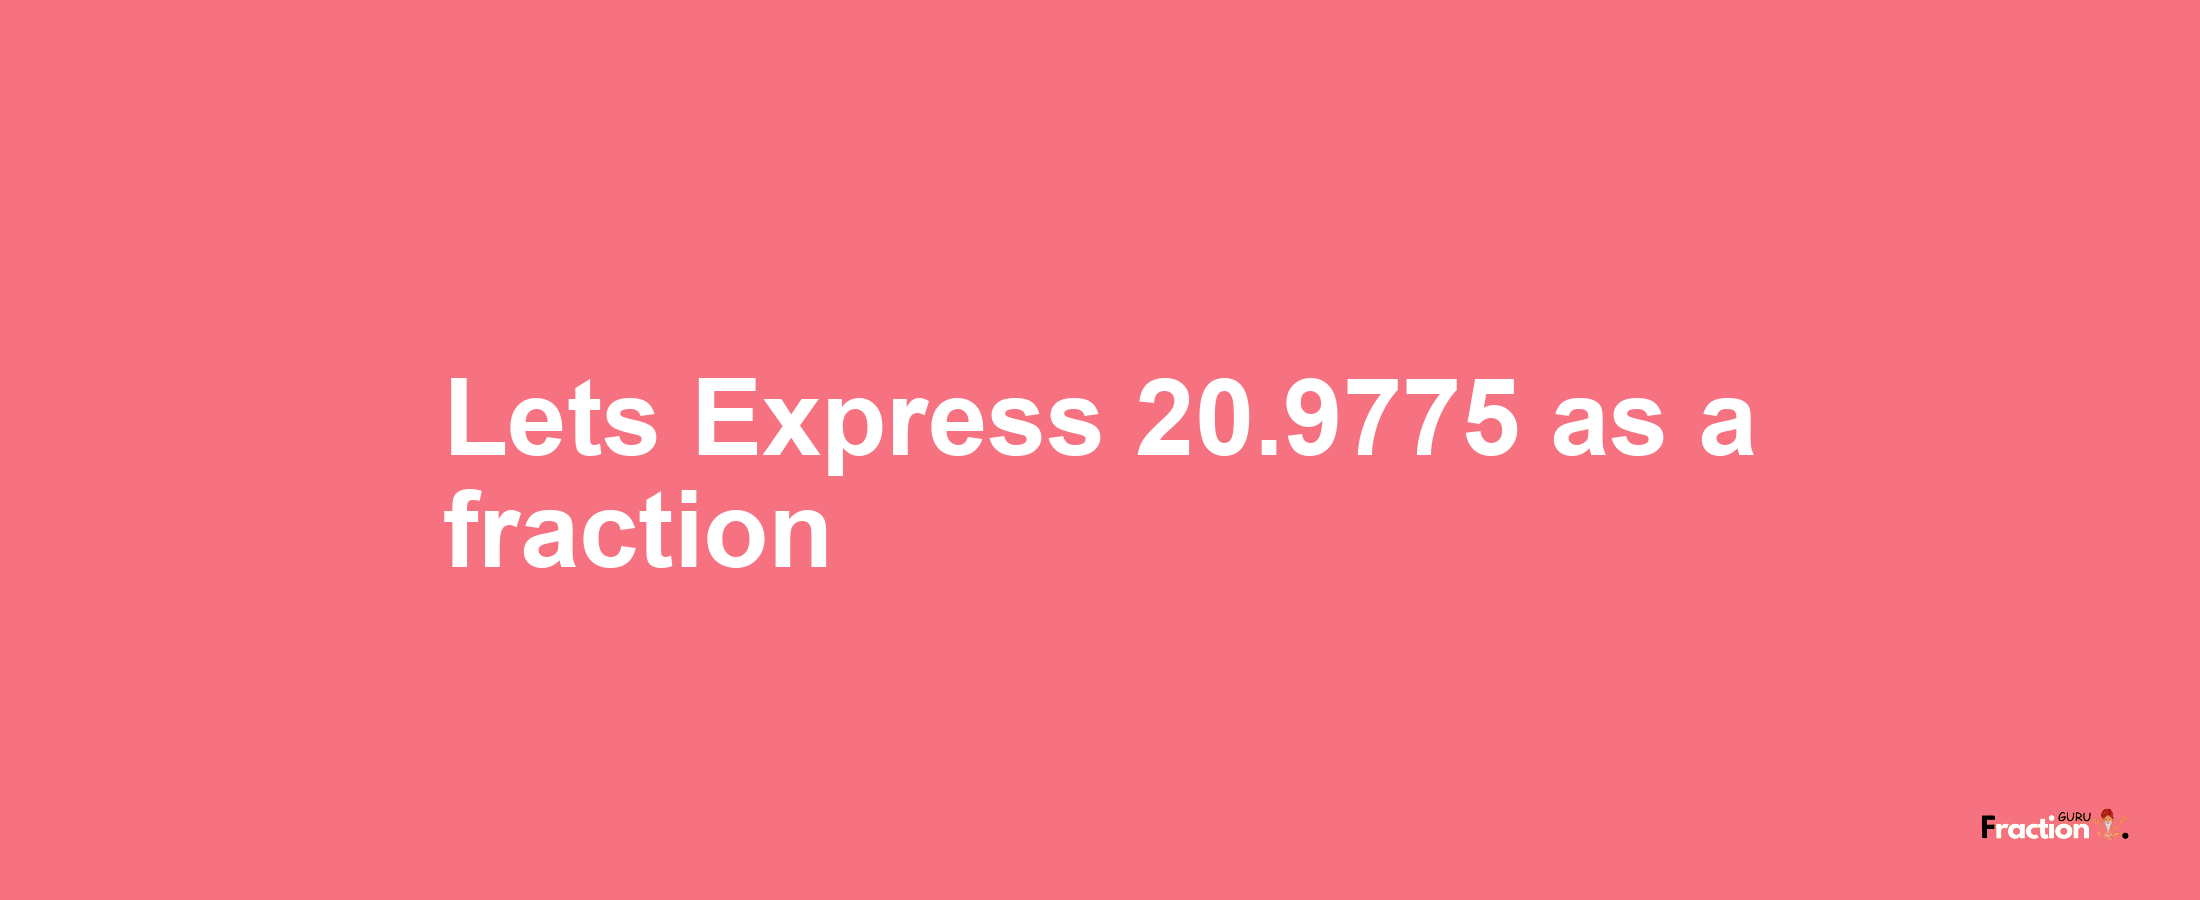 Lets Express 20.9775 as afraction